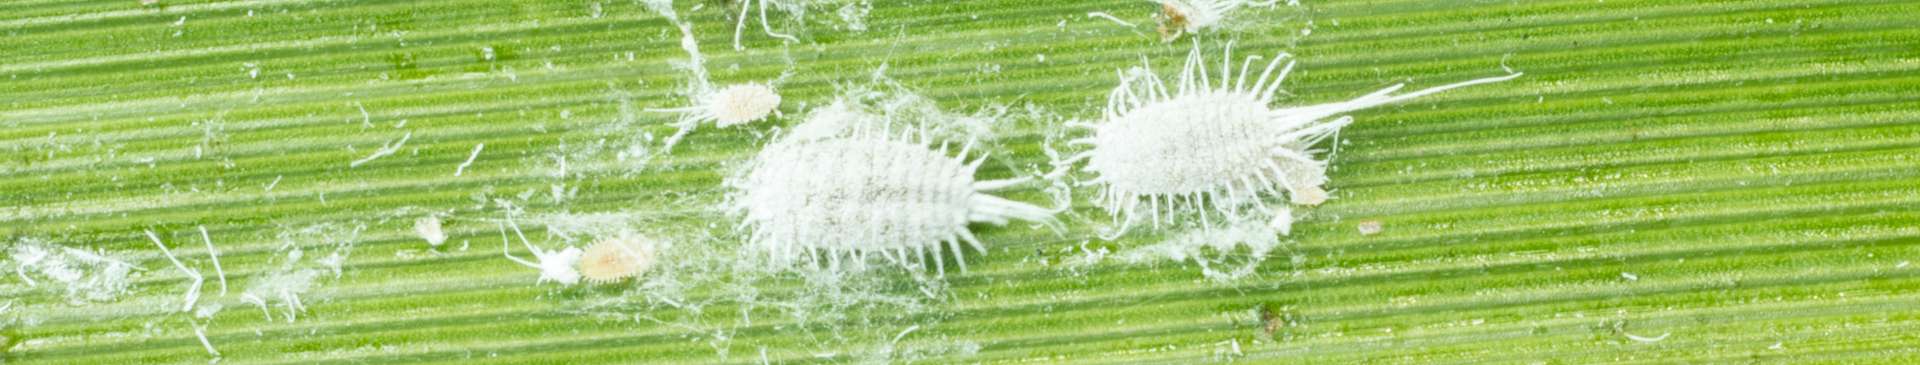 Mealybugs: First Aid for Mild and Severe Infestations